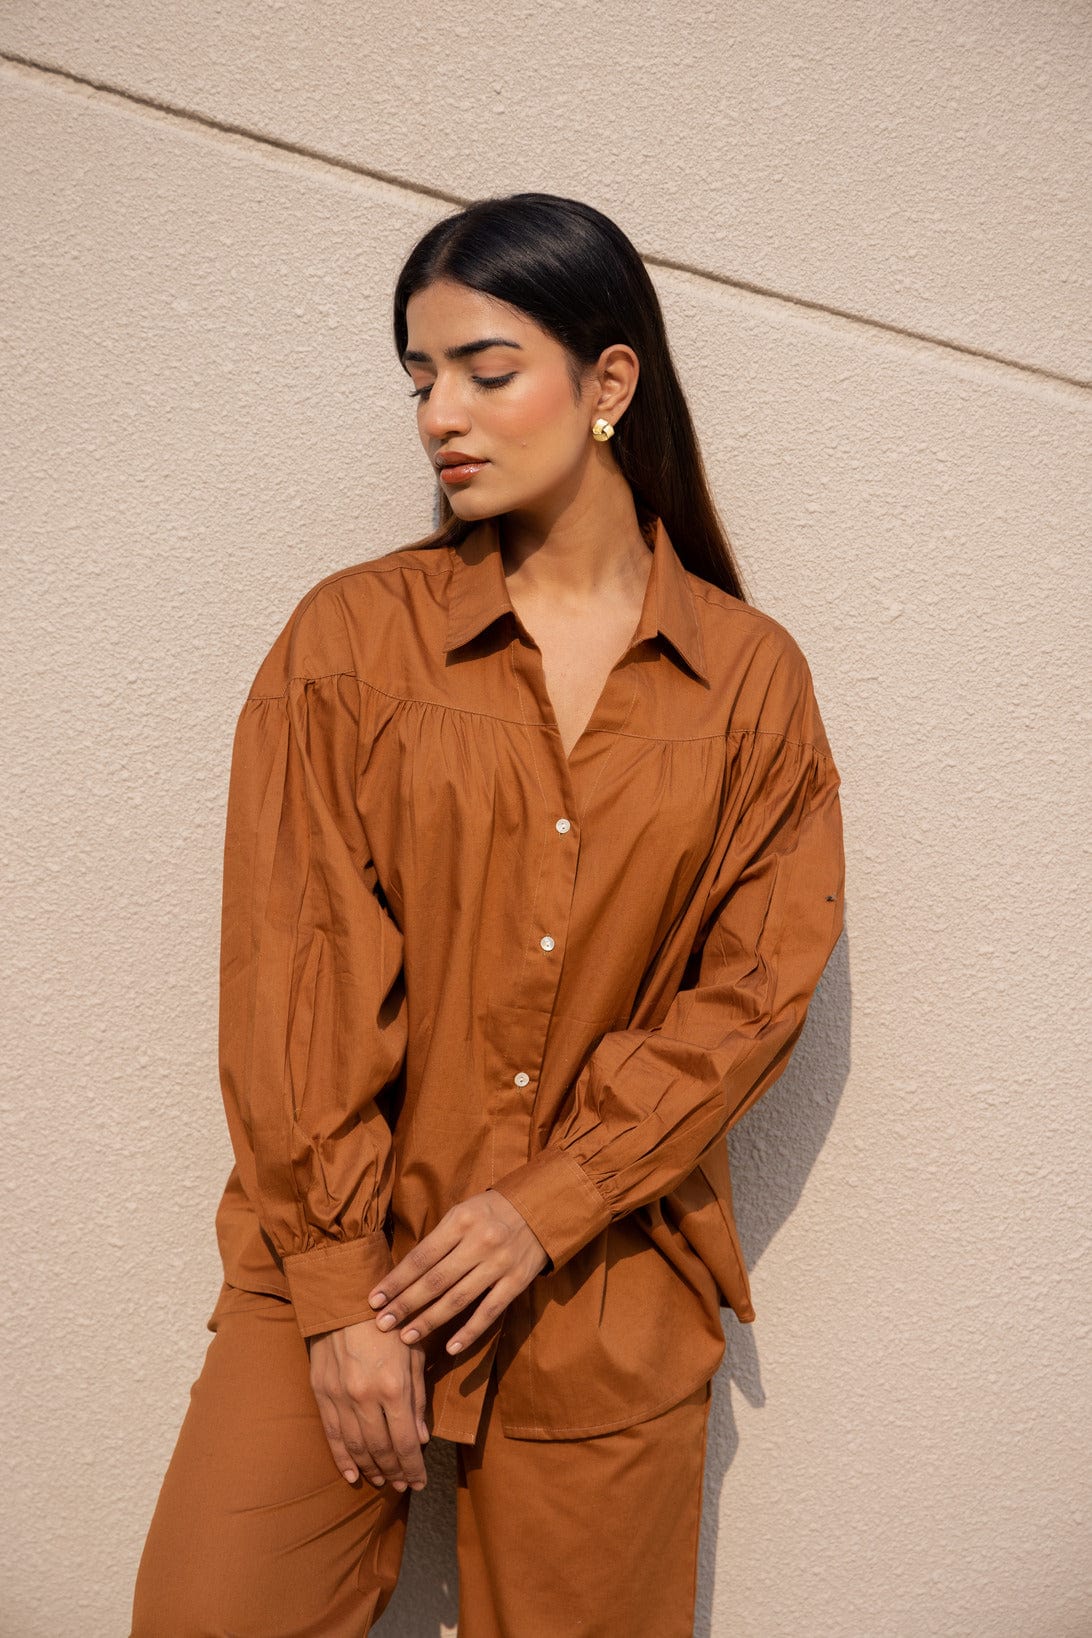 Russet Poplin Shirt with Puff Sleeves & Pants set